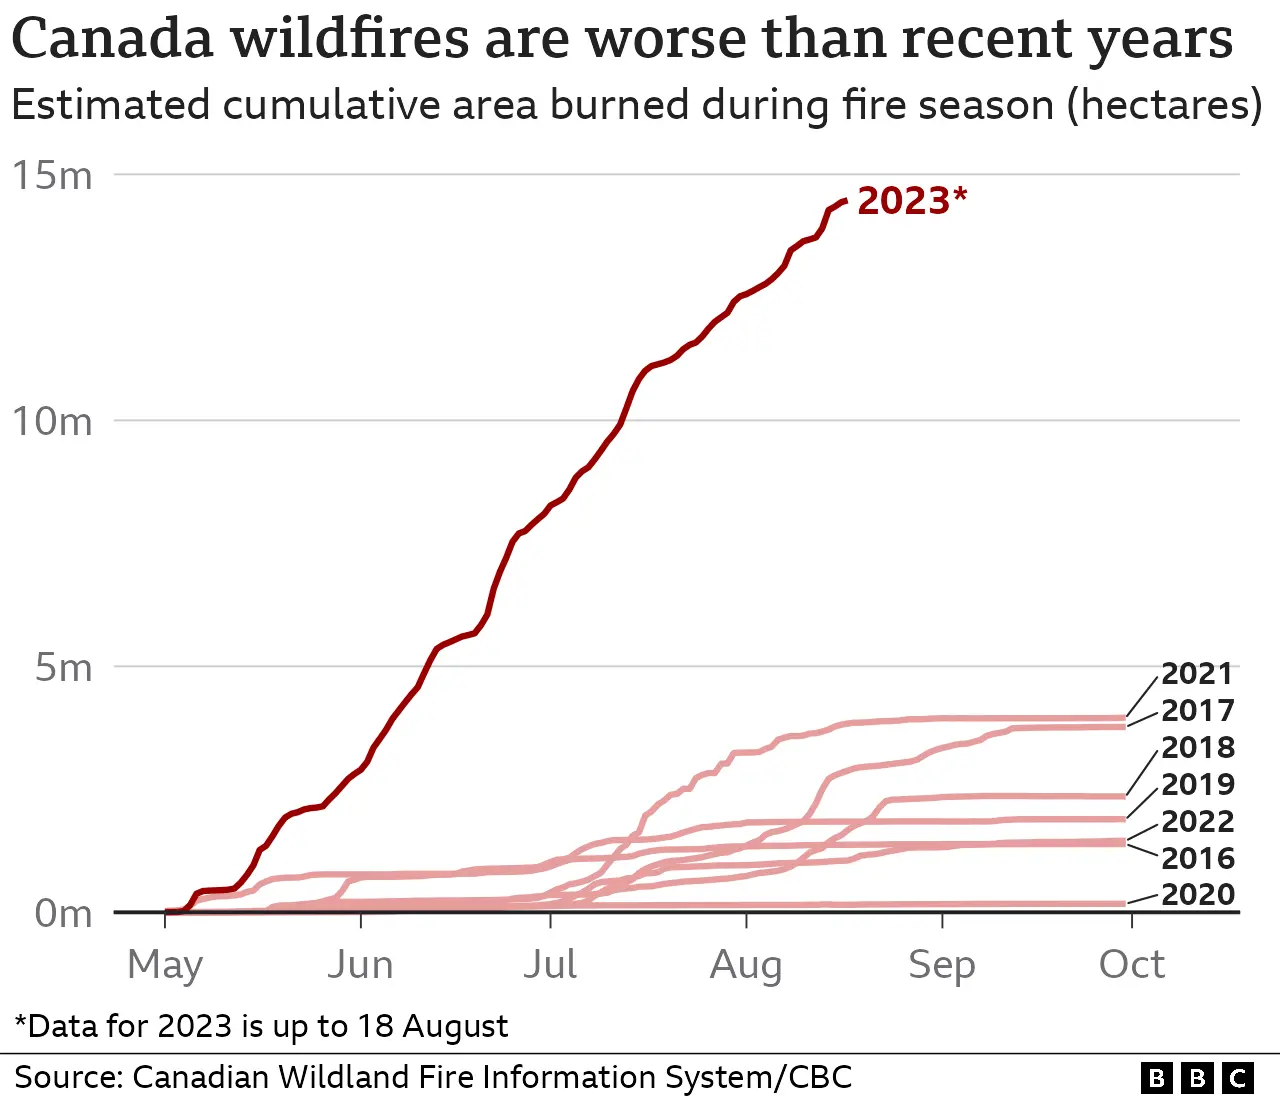 A title in the BBC charts "Canada's wildfires worse than previous years" shows that almost 15 million hectares have already been burned in 2023, compared to the previous record of around 4.5 million in 2021 and 2017. The figures for 2018, 2019, 2022, 2016 and 2020 are much lower.